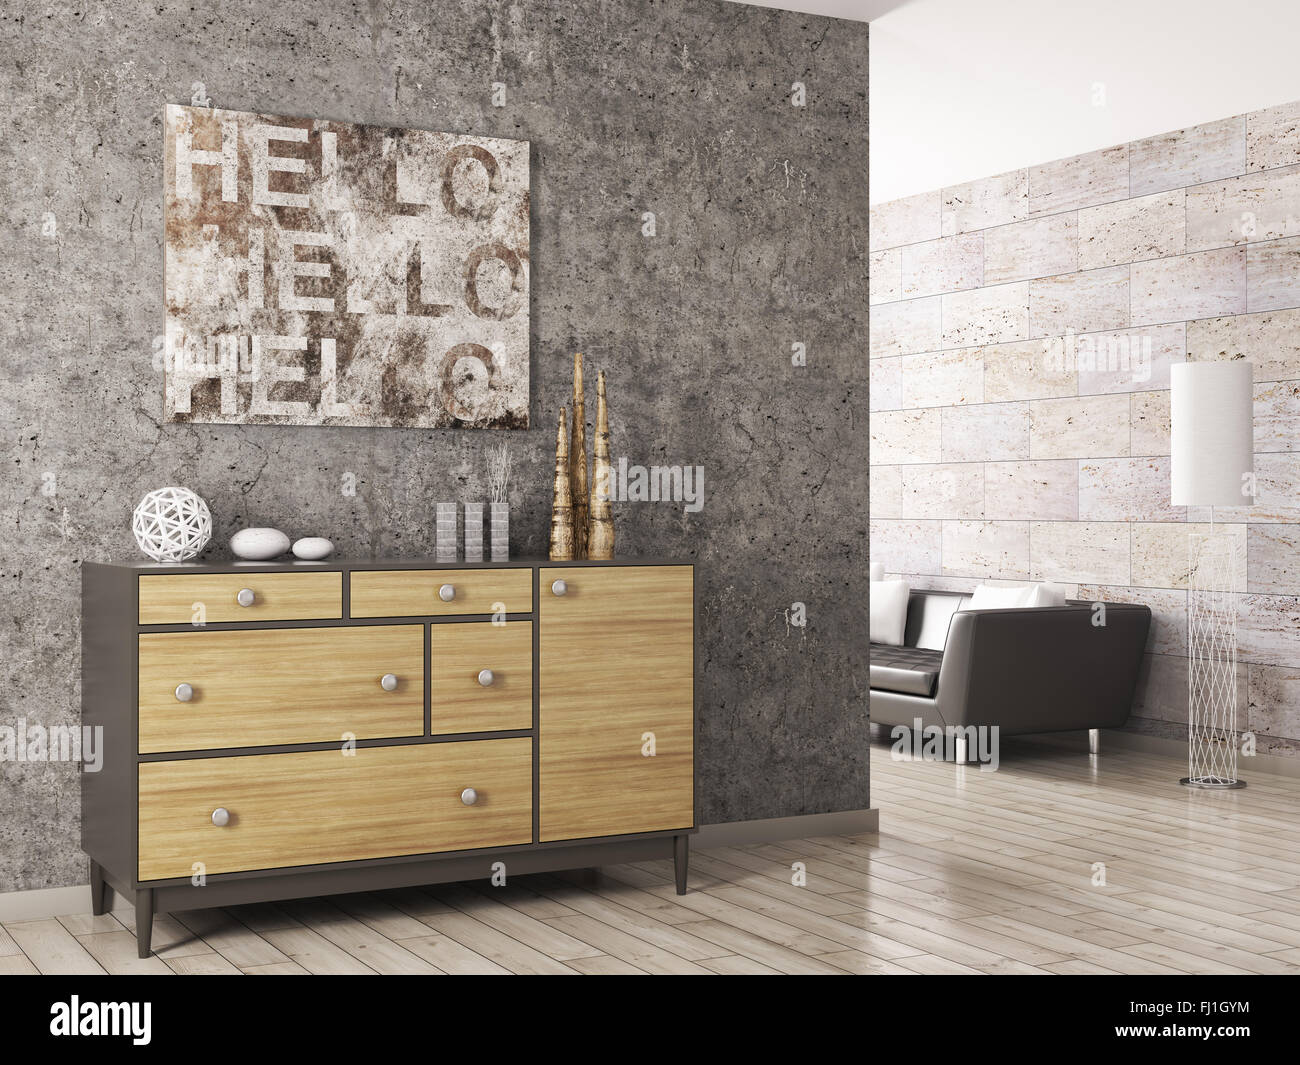 Interior of a living room with wooden cabinet against concrete wall 3d render Stock Photo